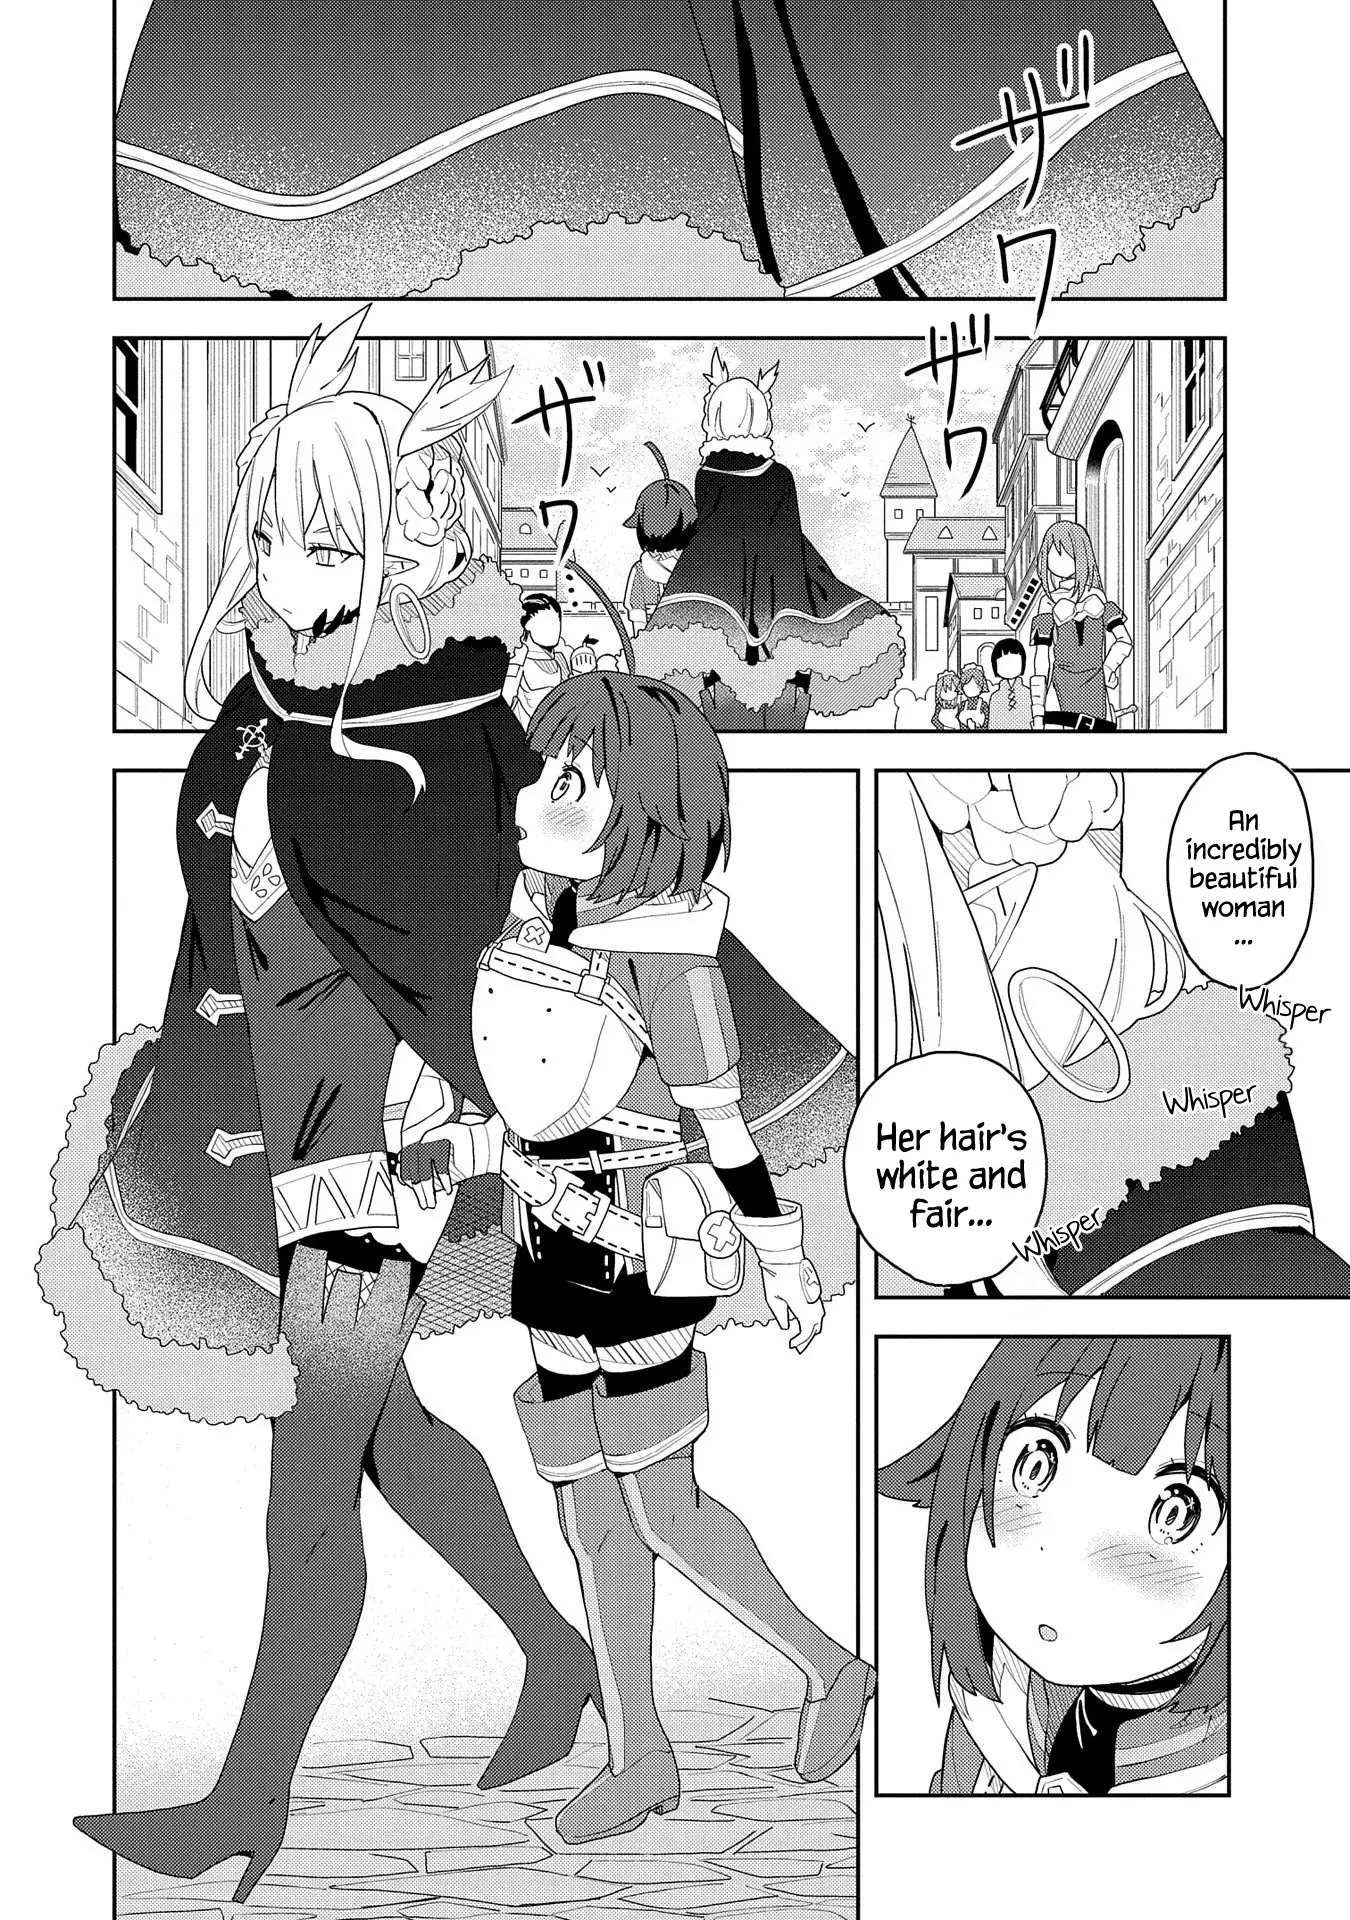 I Summoned The Devil To Grant Me A Wish, But I Married Her Instead Since She Was Adorable ~My New Devil Wife~ - 2 page 24